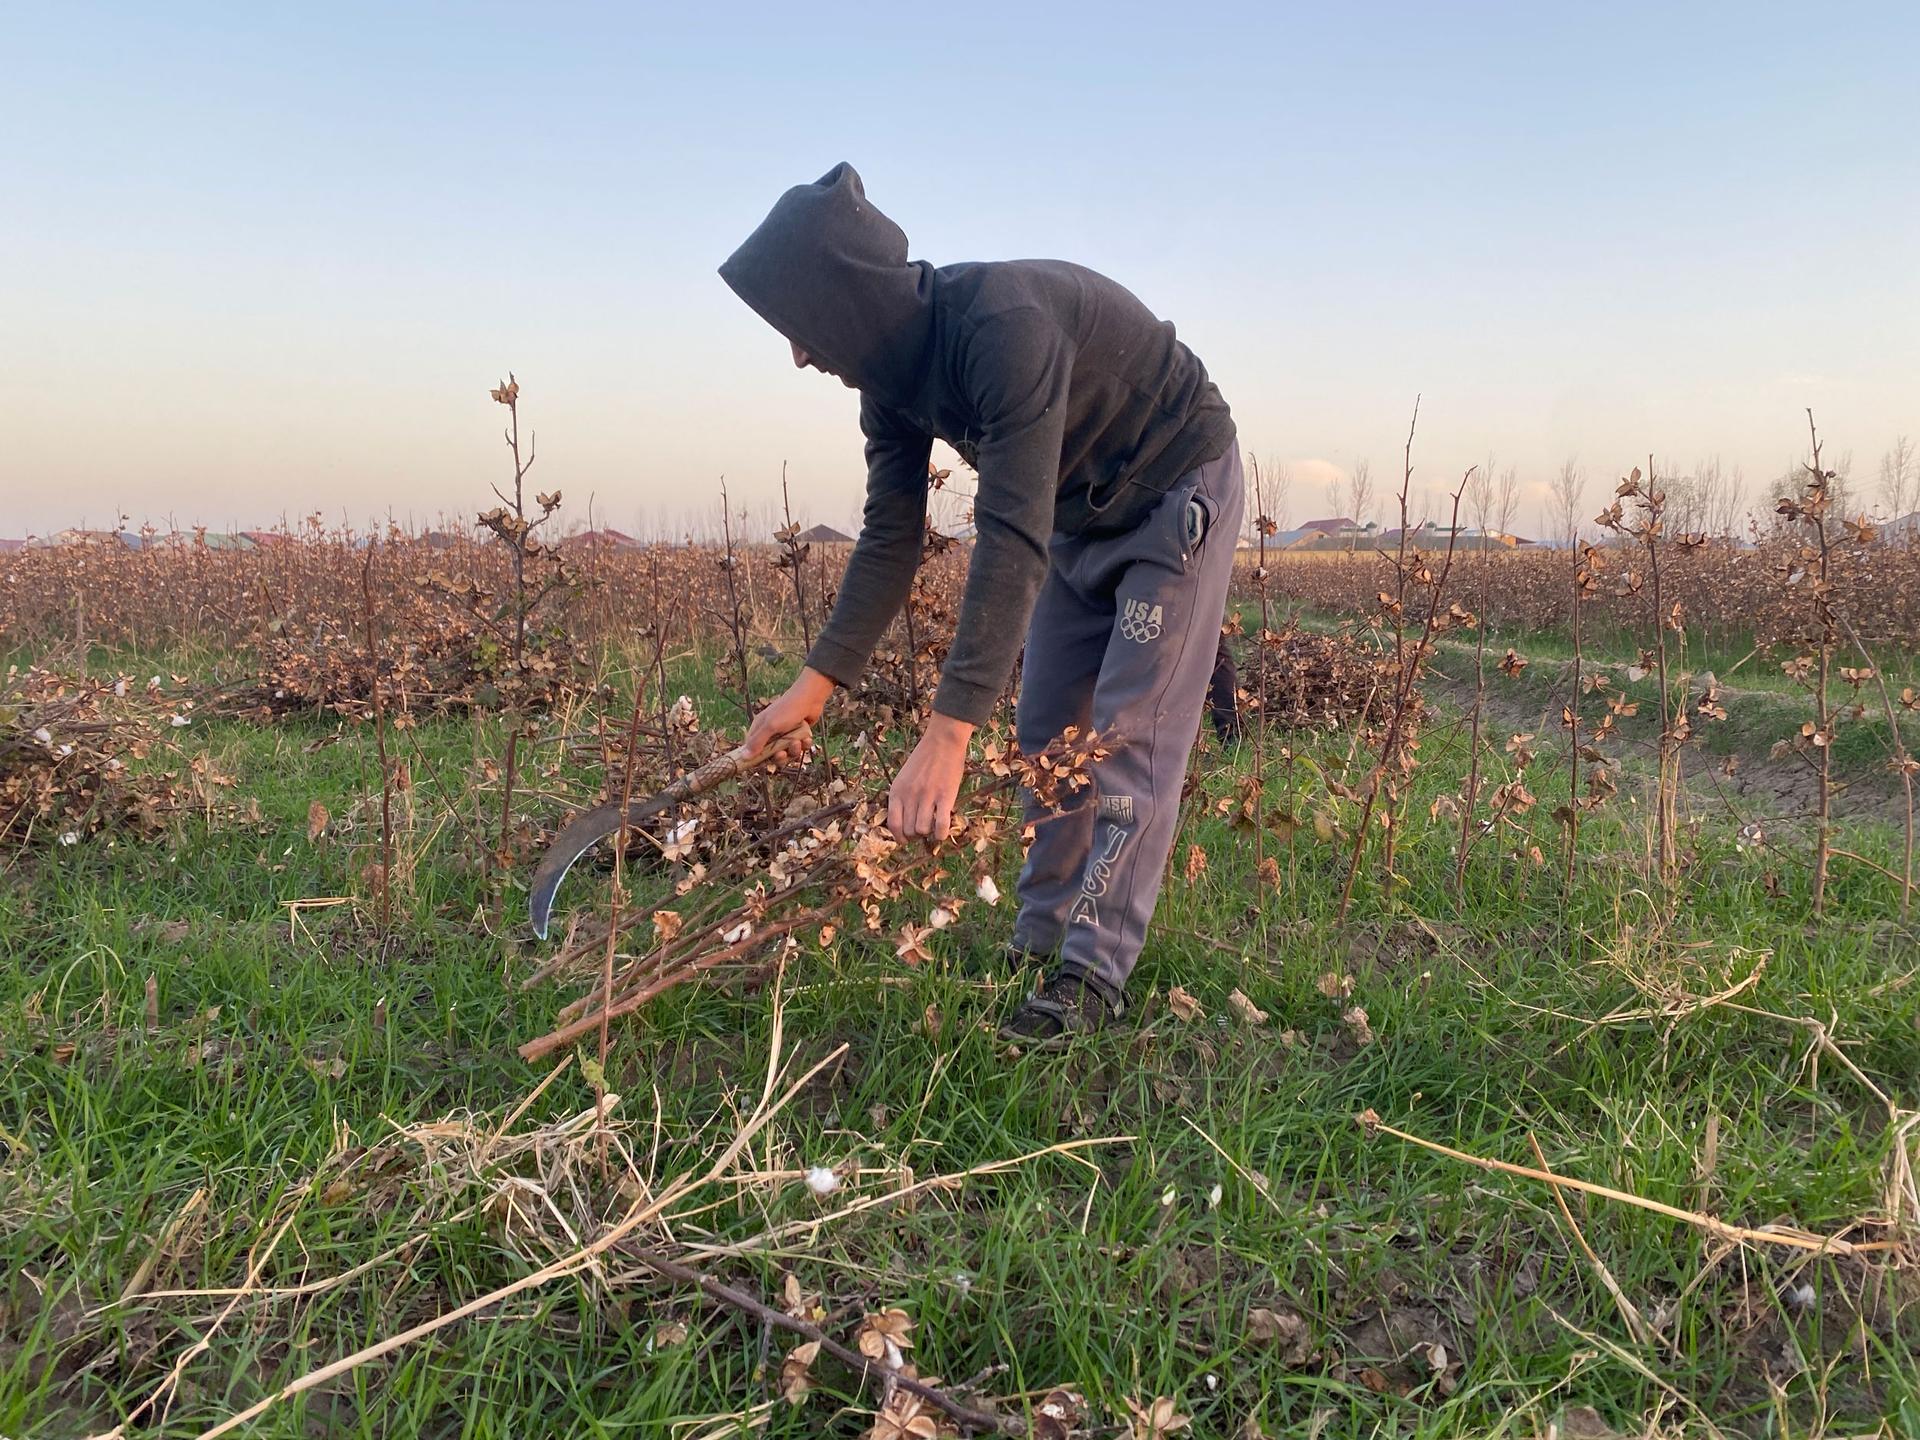 A worker uses a scythe to cut down cotton plants at the end of the harvest.